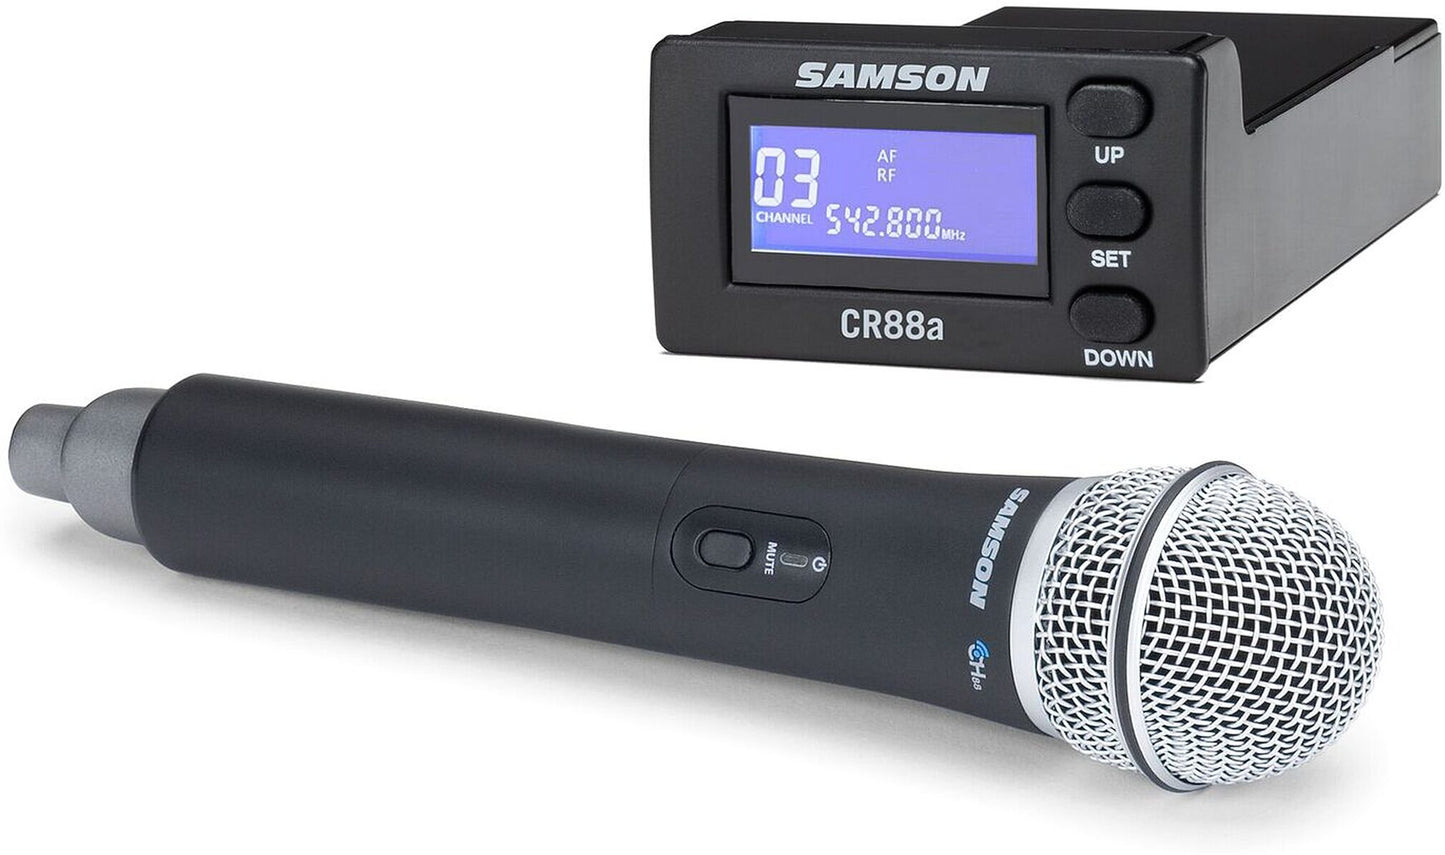 Samson CR88a Wireless Vocal Microphone Module for XP310/312 System, Channel K